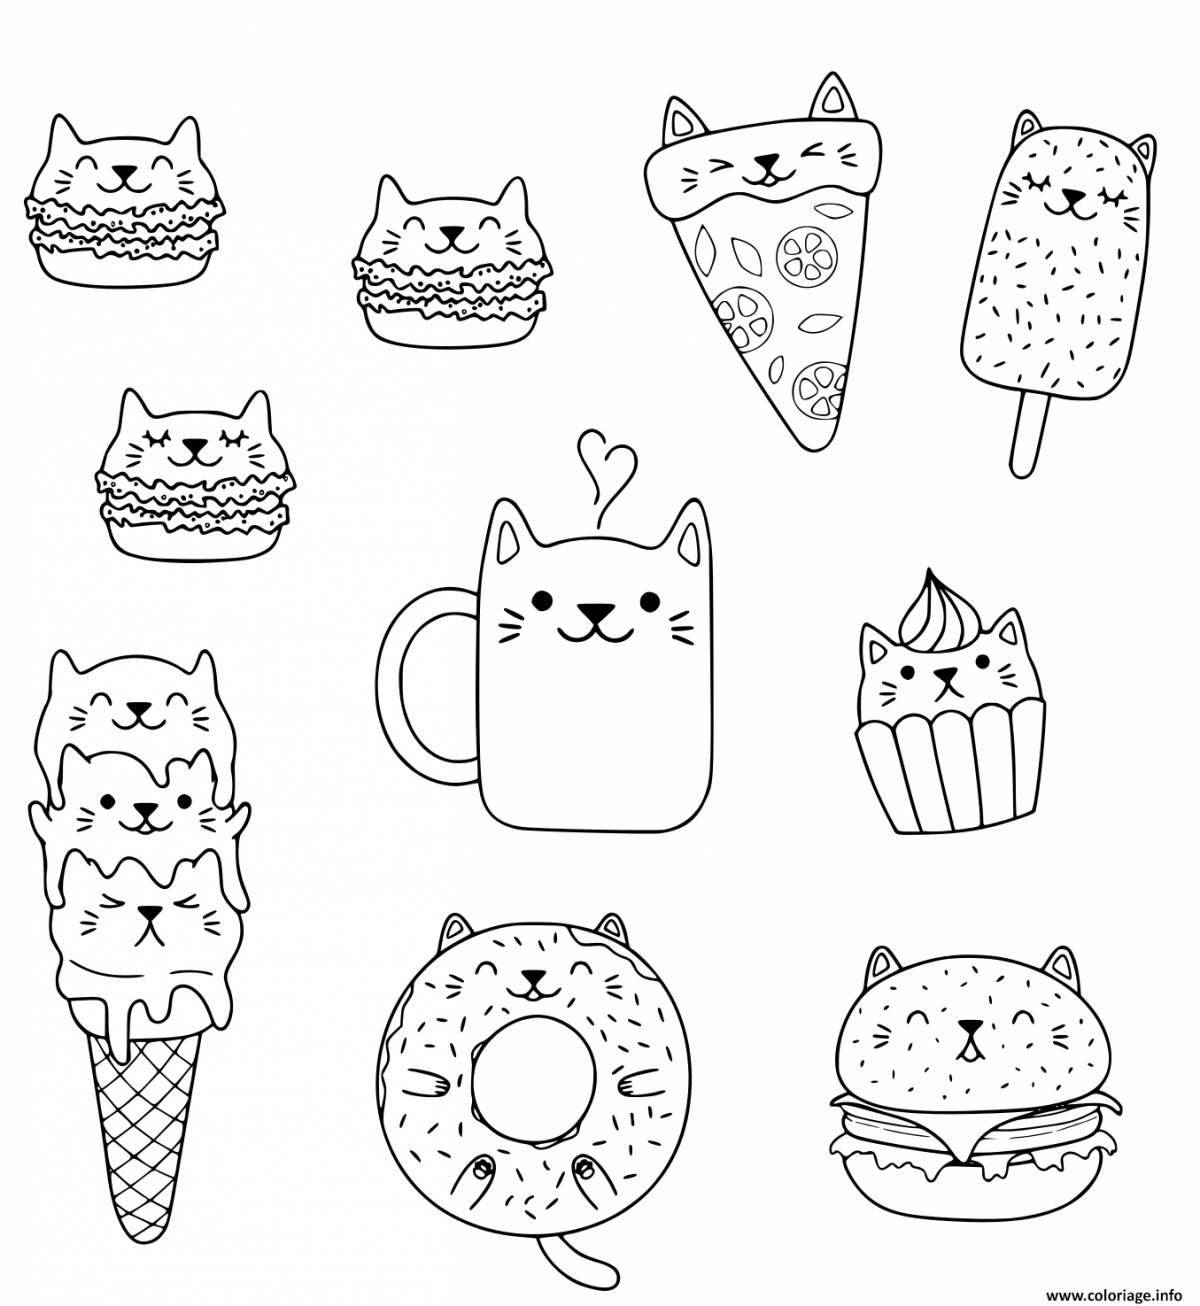 Coloring page dazzling donut cat